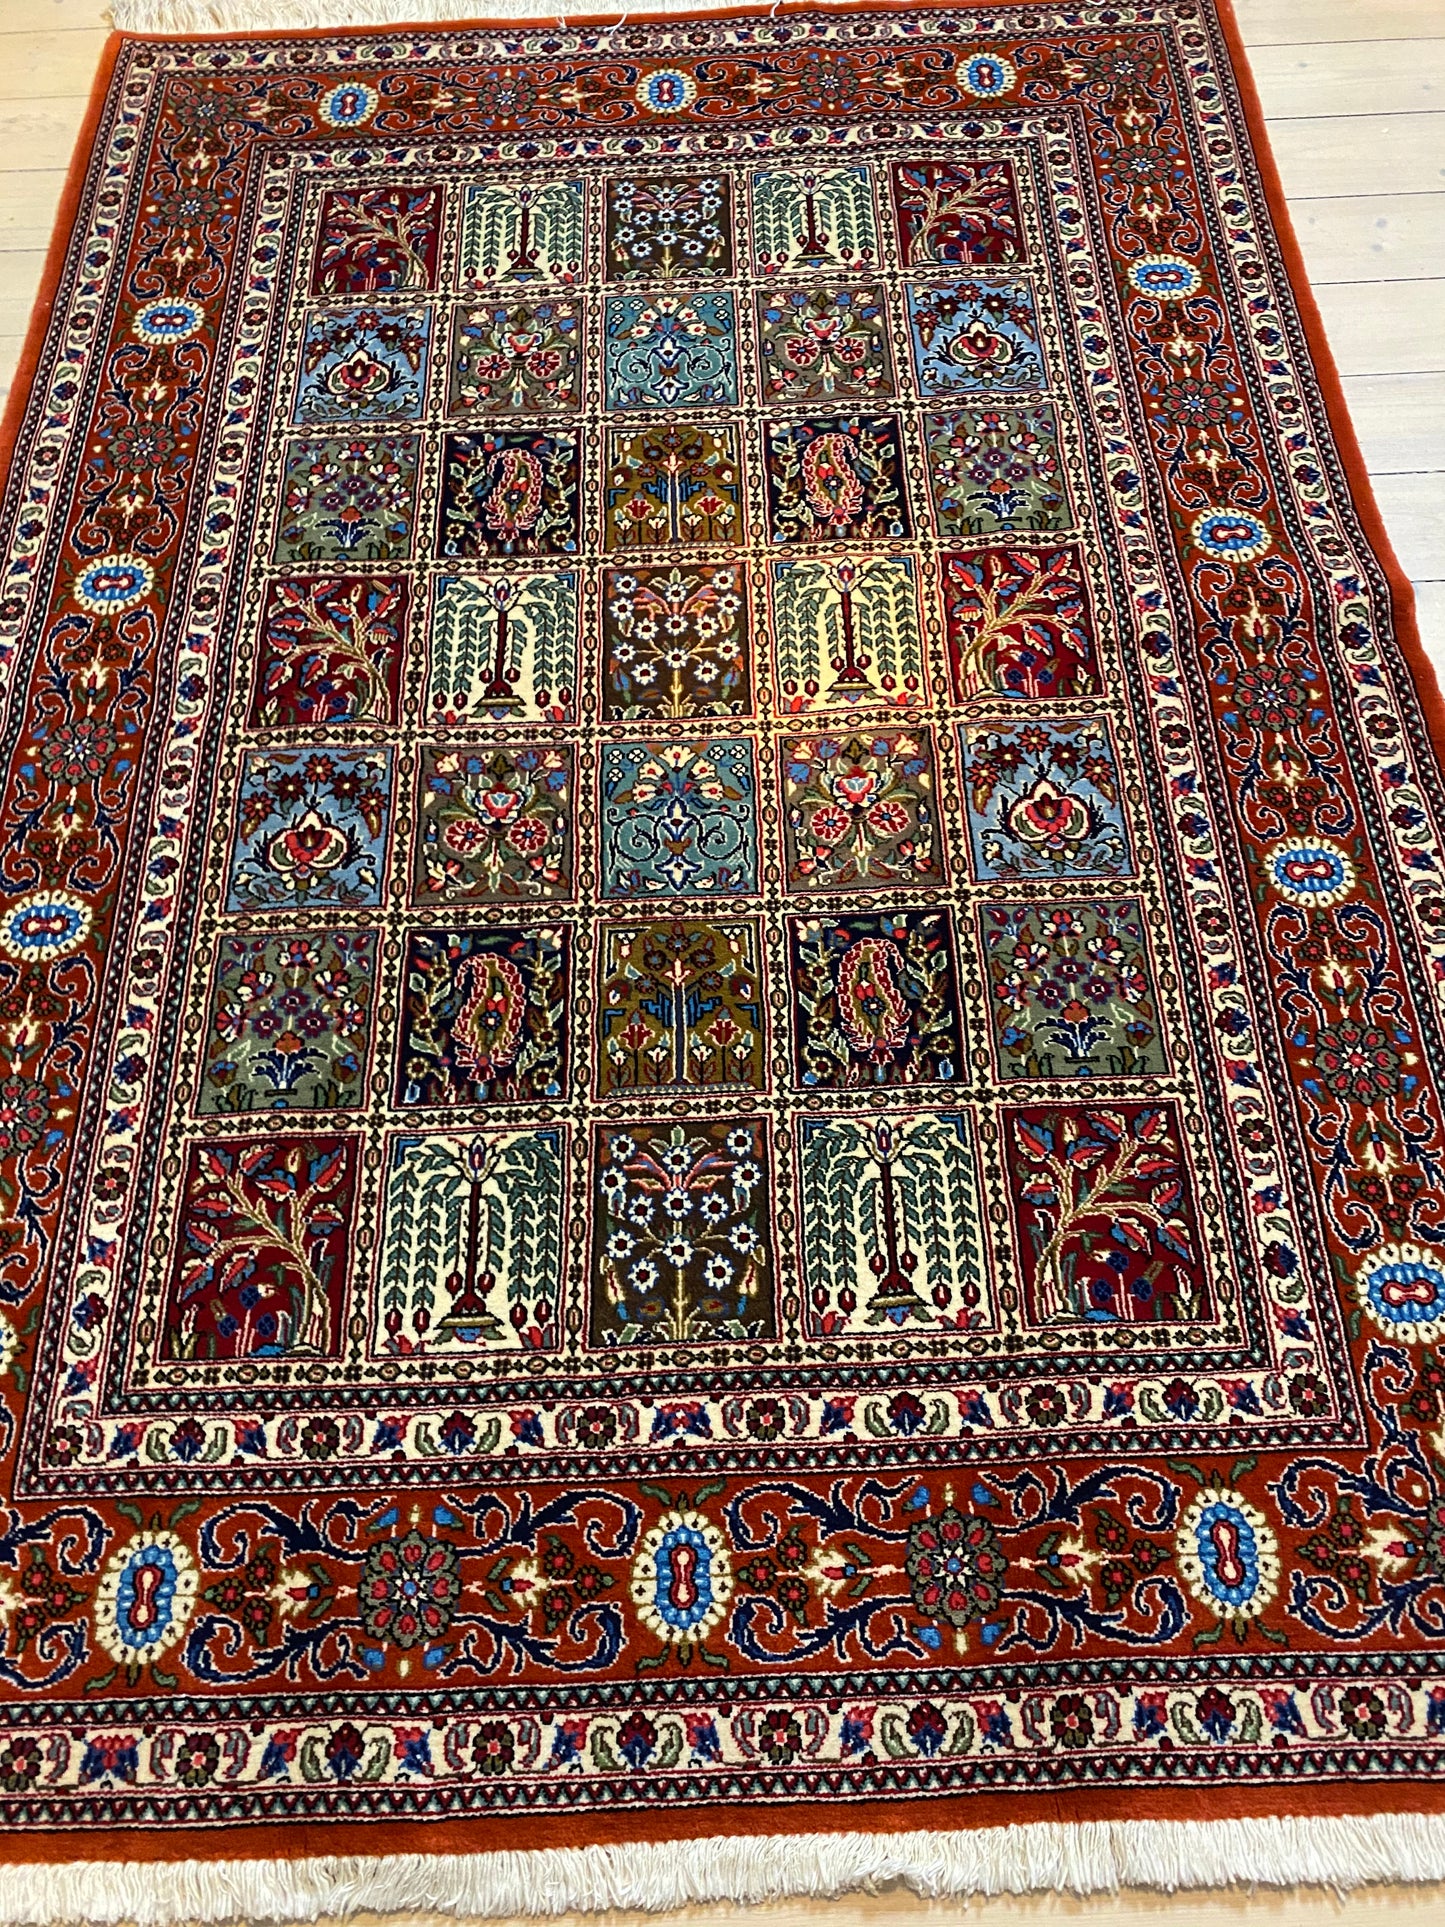 A Persian hand-knotted atelier Ghom carpet made of kork wool. Size 160 x 240! With a classic garden pattern!